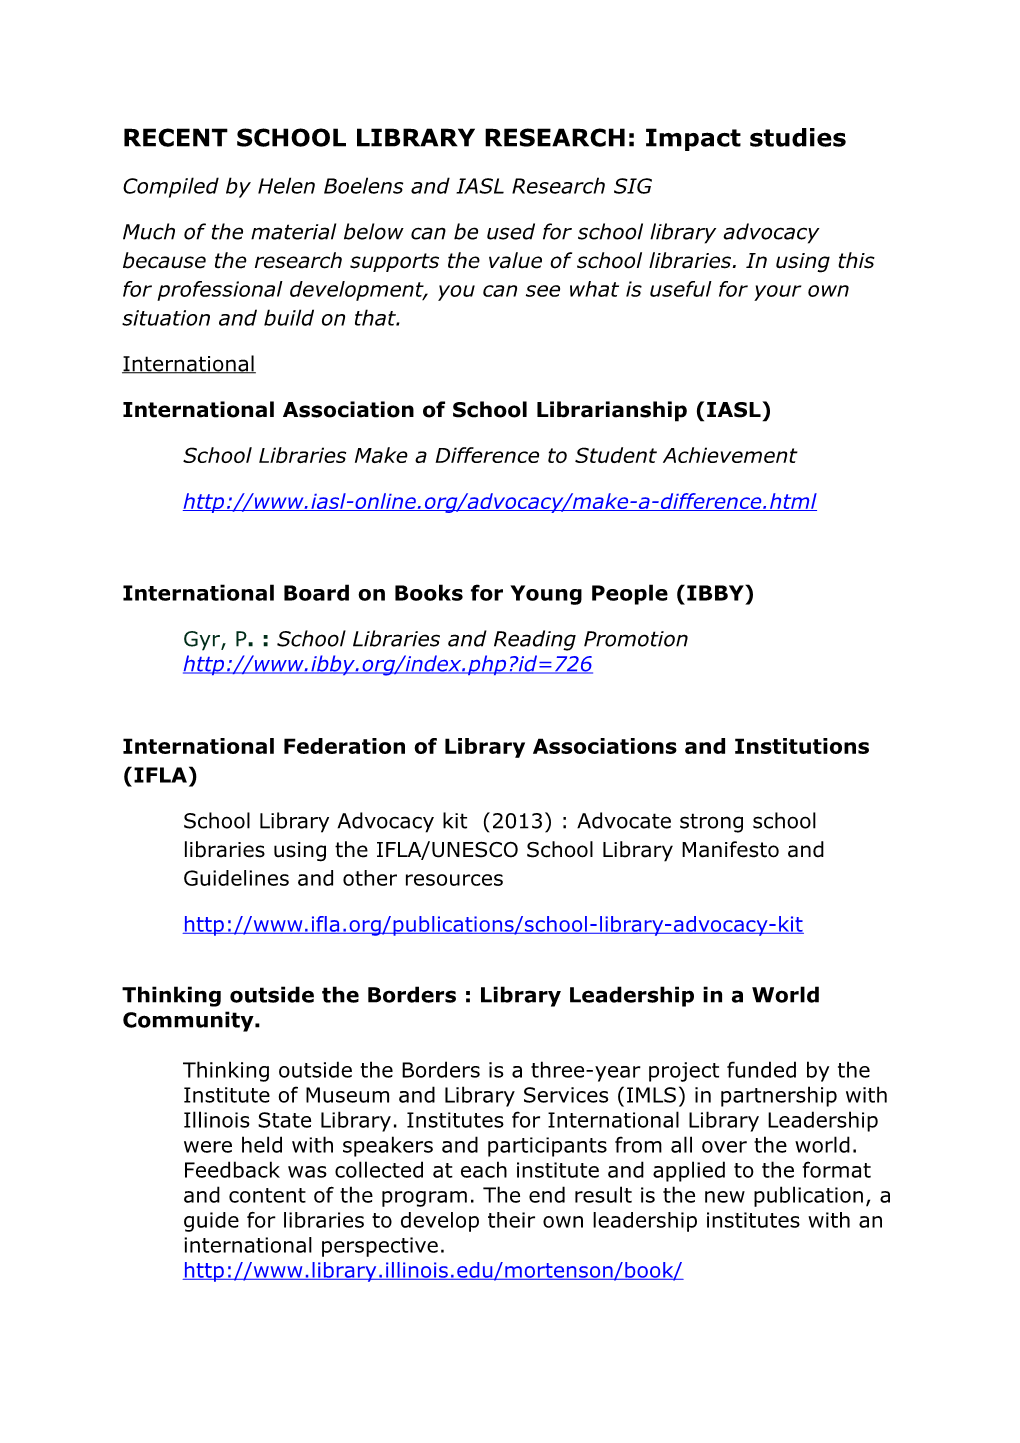 RECENT SCHOOL LIBRARY RESEARCH: Impact Studies